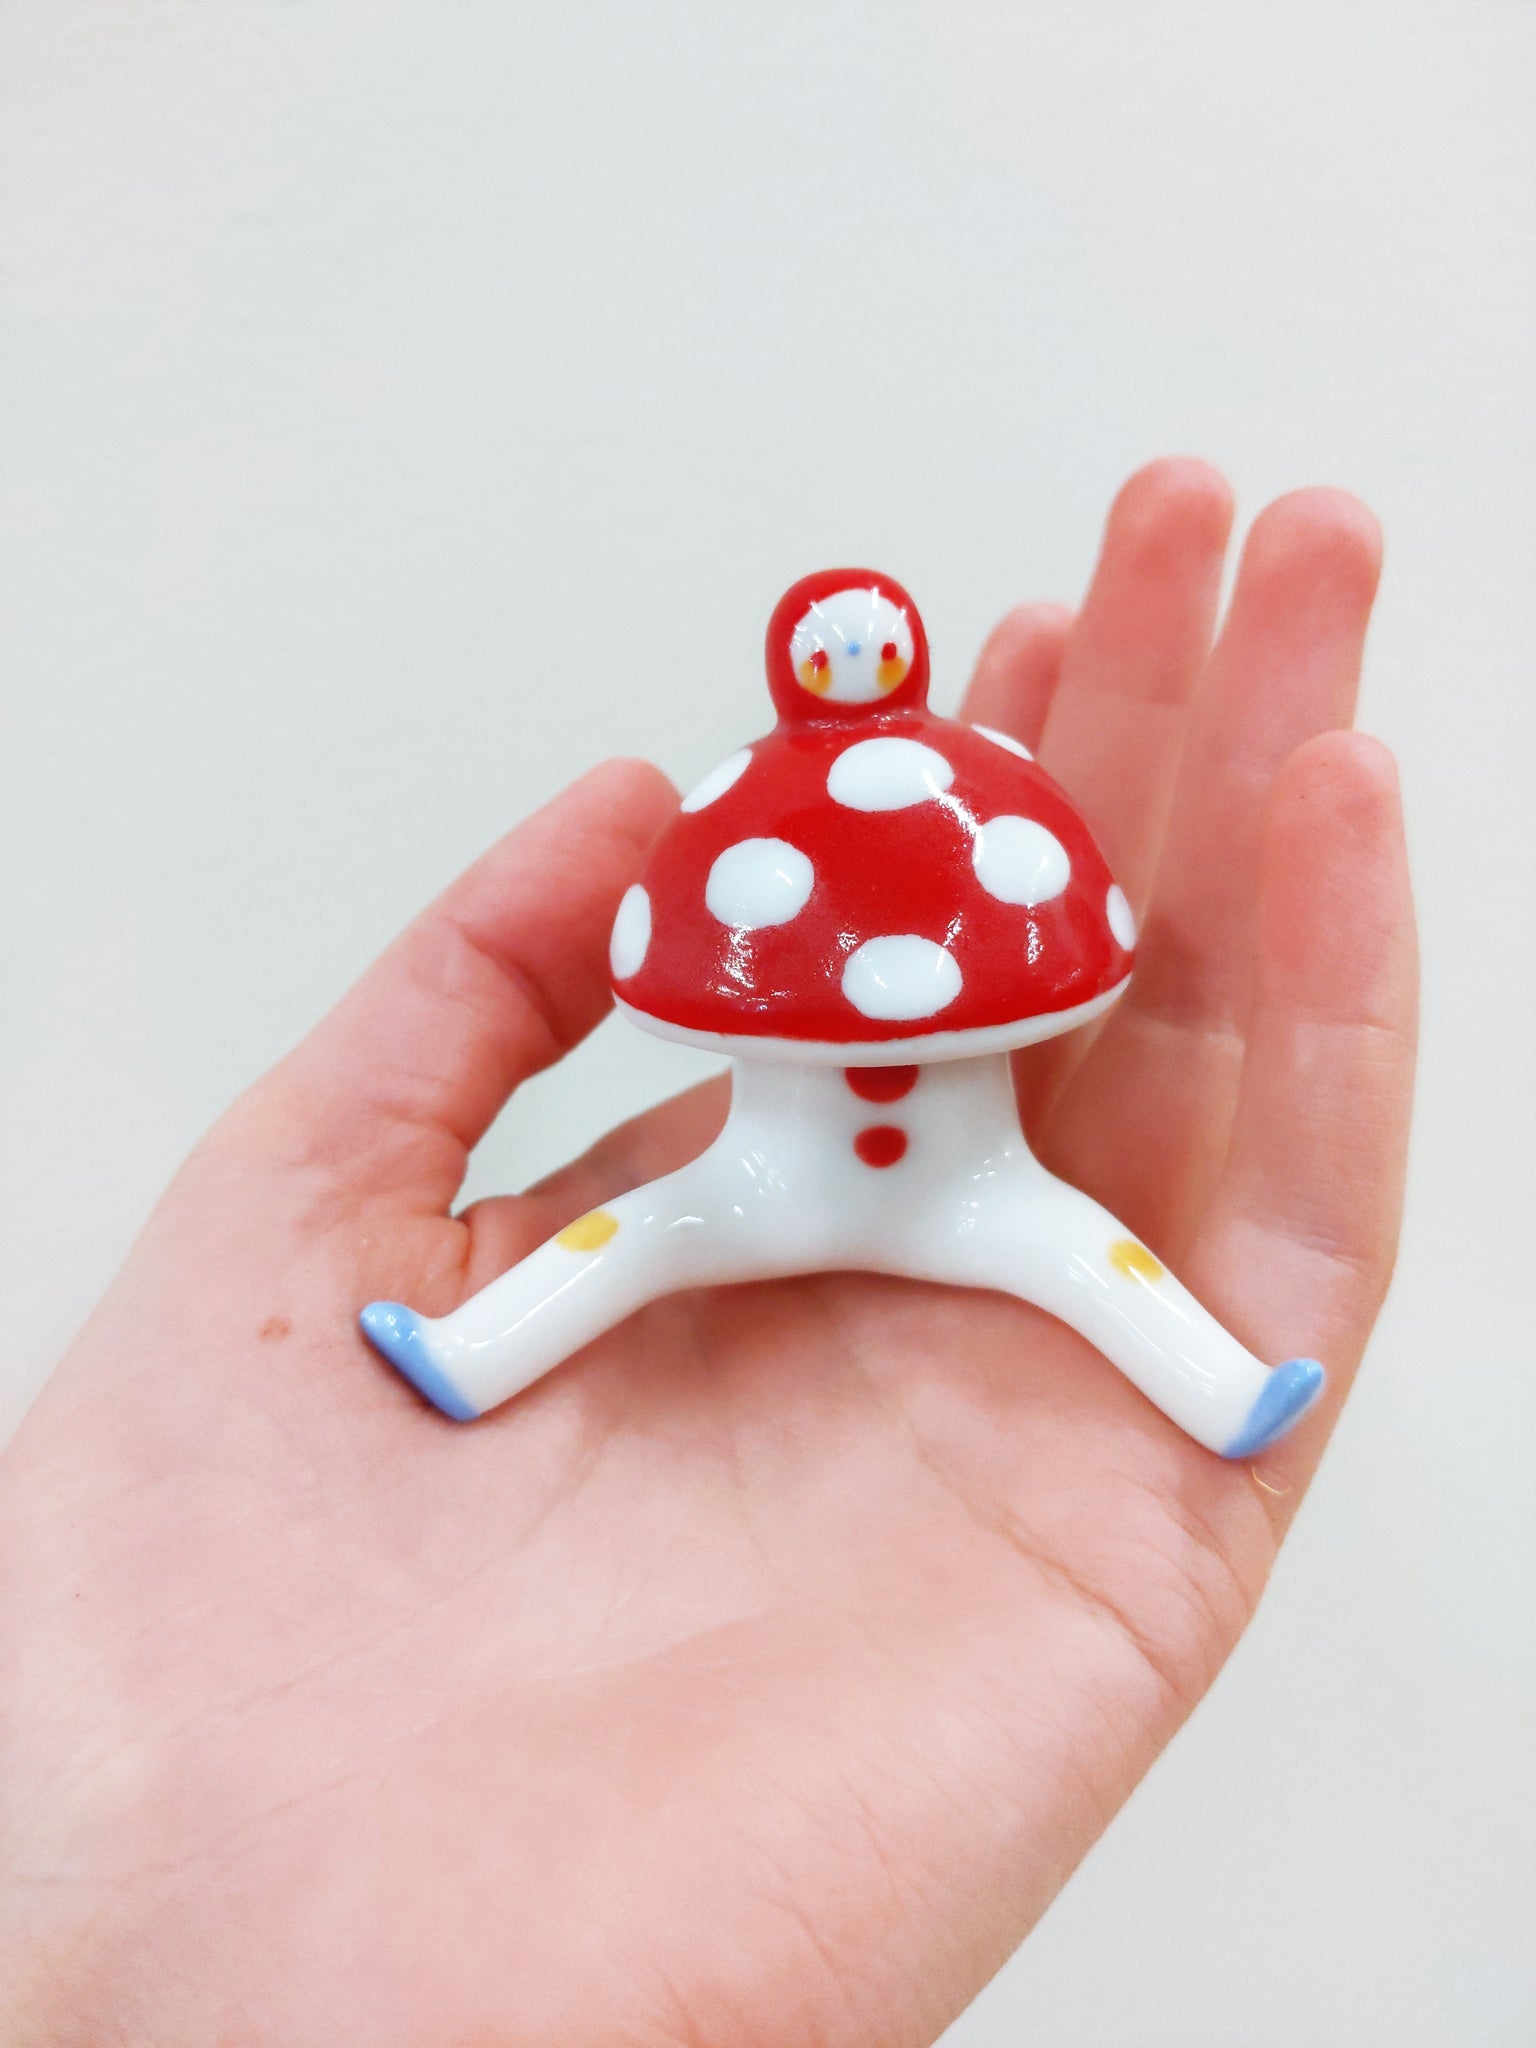 goatPIERROT Ceramic Art Toy [23.023: Mushroombirdman with Removable Top]